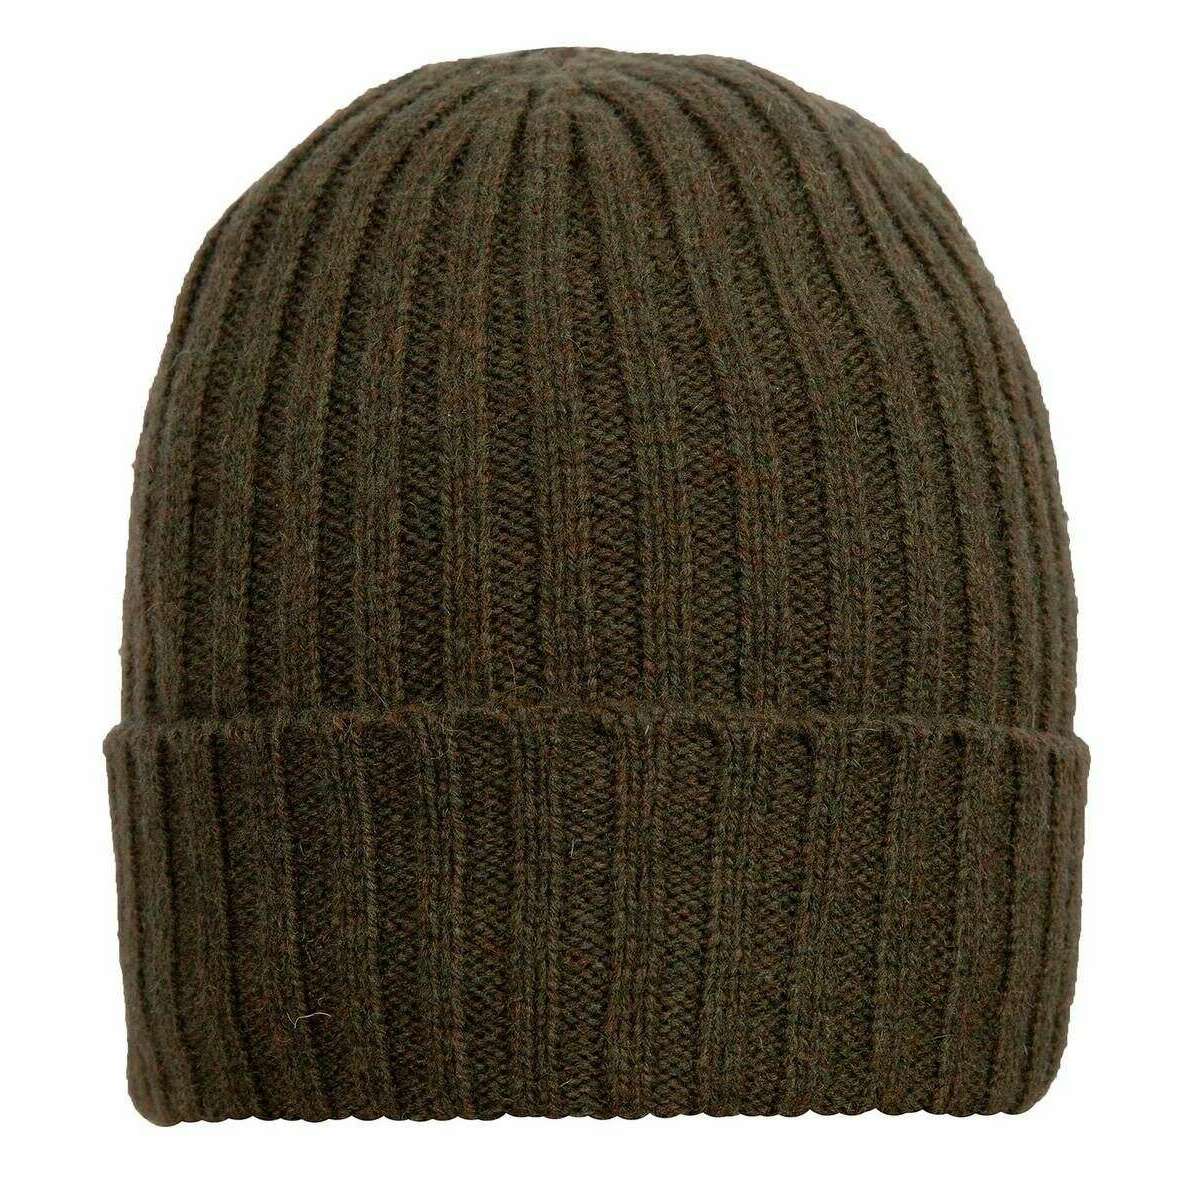 Dents Rib Knit Thinsulate-Lined Beanie Hat - Sage Green